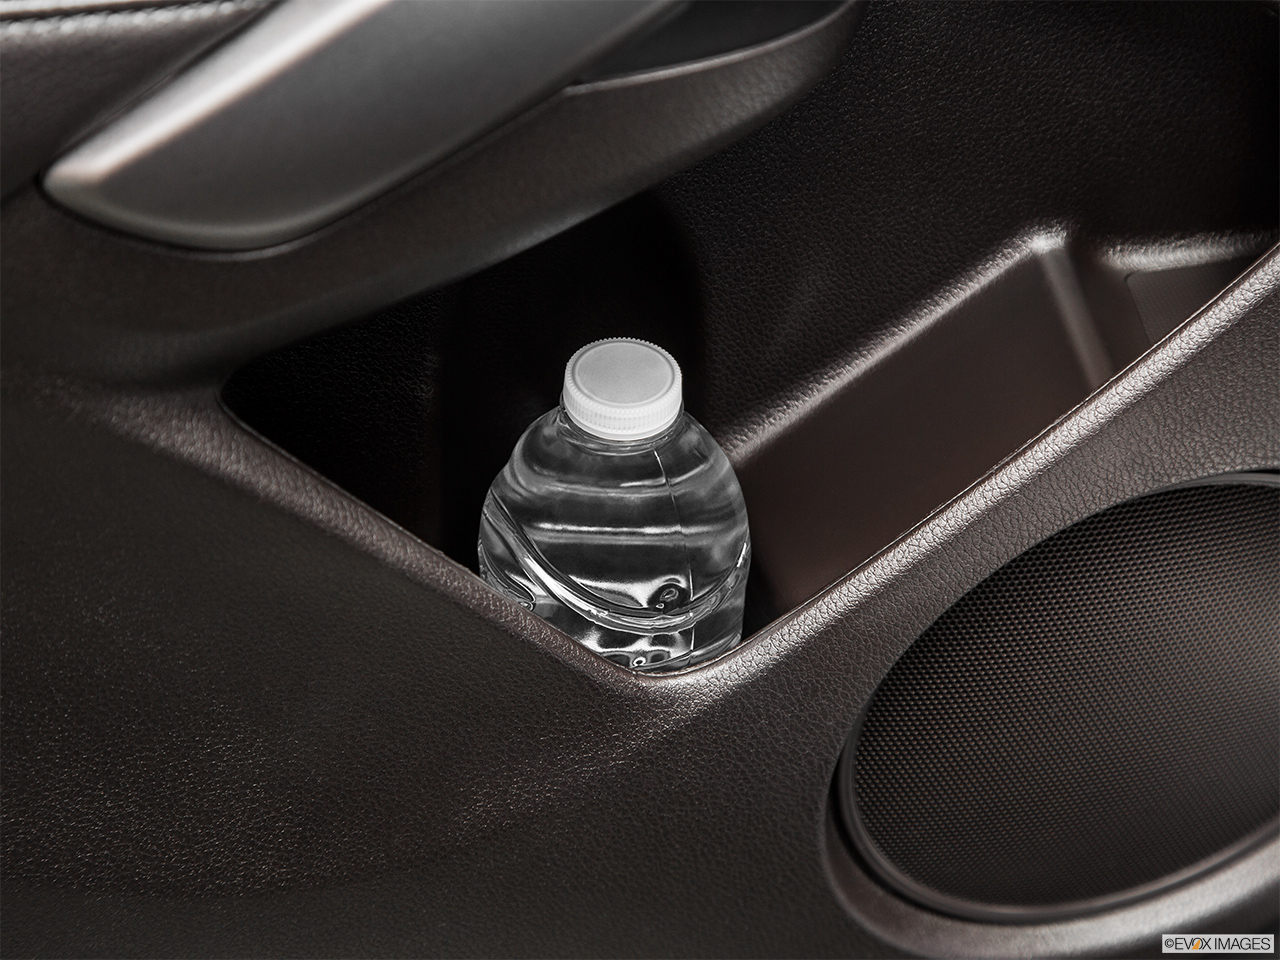 2015 Acura RDX AWD Second row side cup holder with coffee prop, or second row door cup holder with water bottle. 